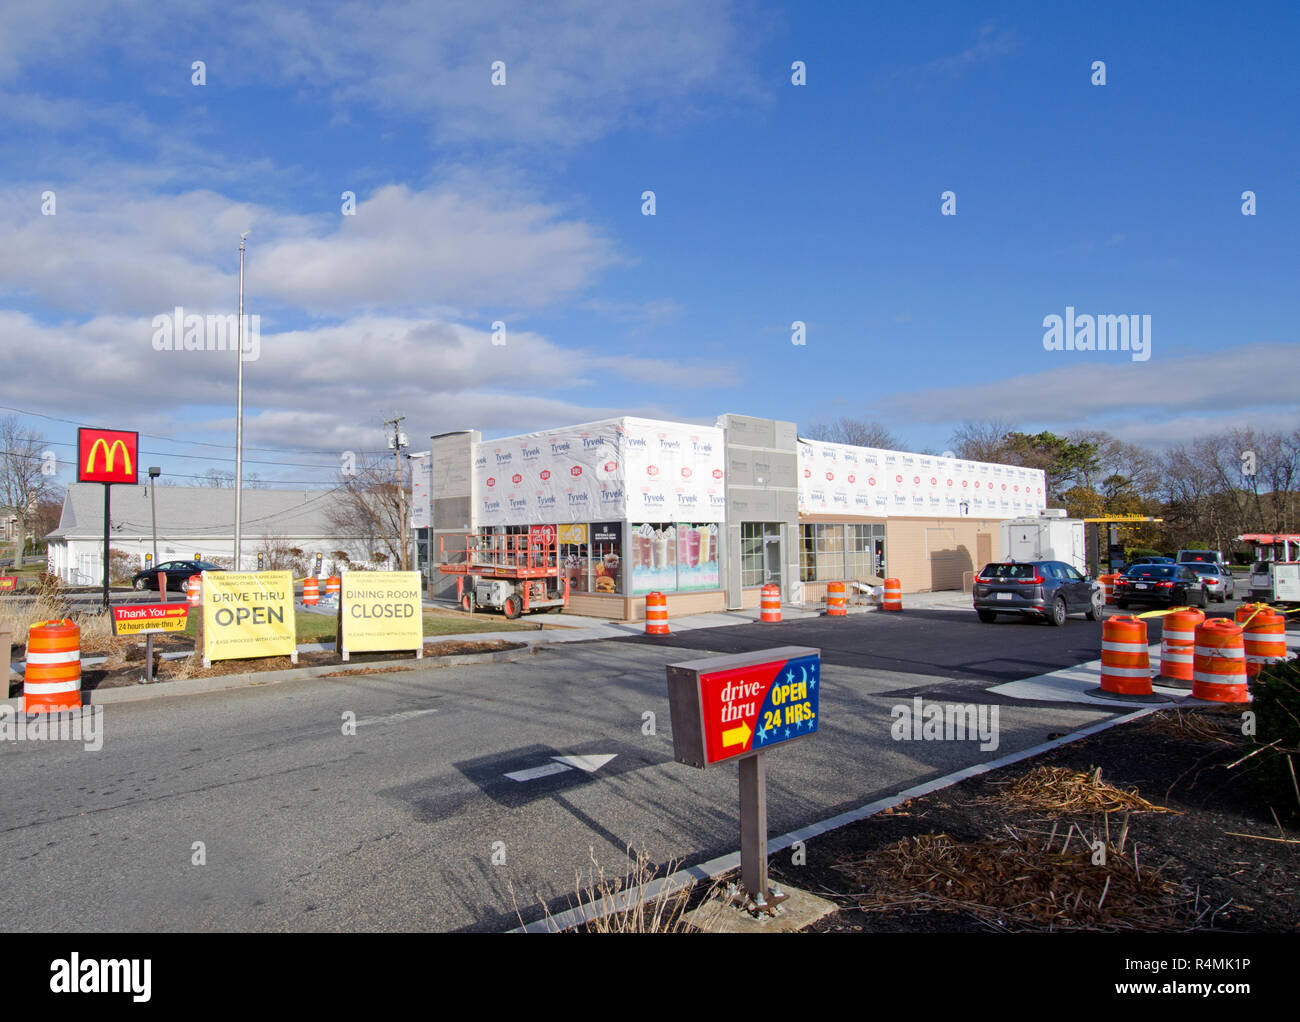 McDonalds fast food restaurant being remodeled with drive thru open and dining room closed signs in Falmouth, Cape Cod, Massachusetts USA Stock Photo